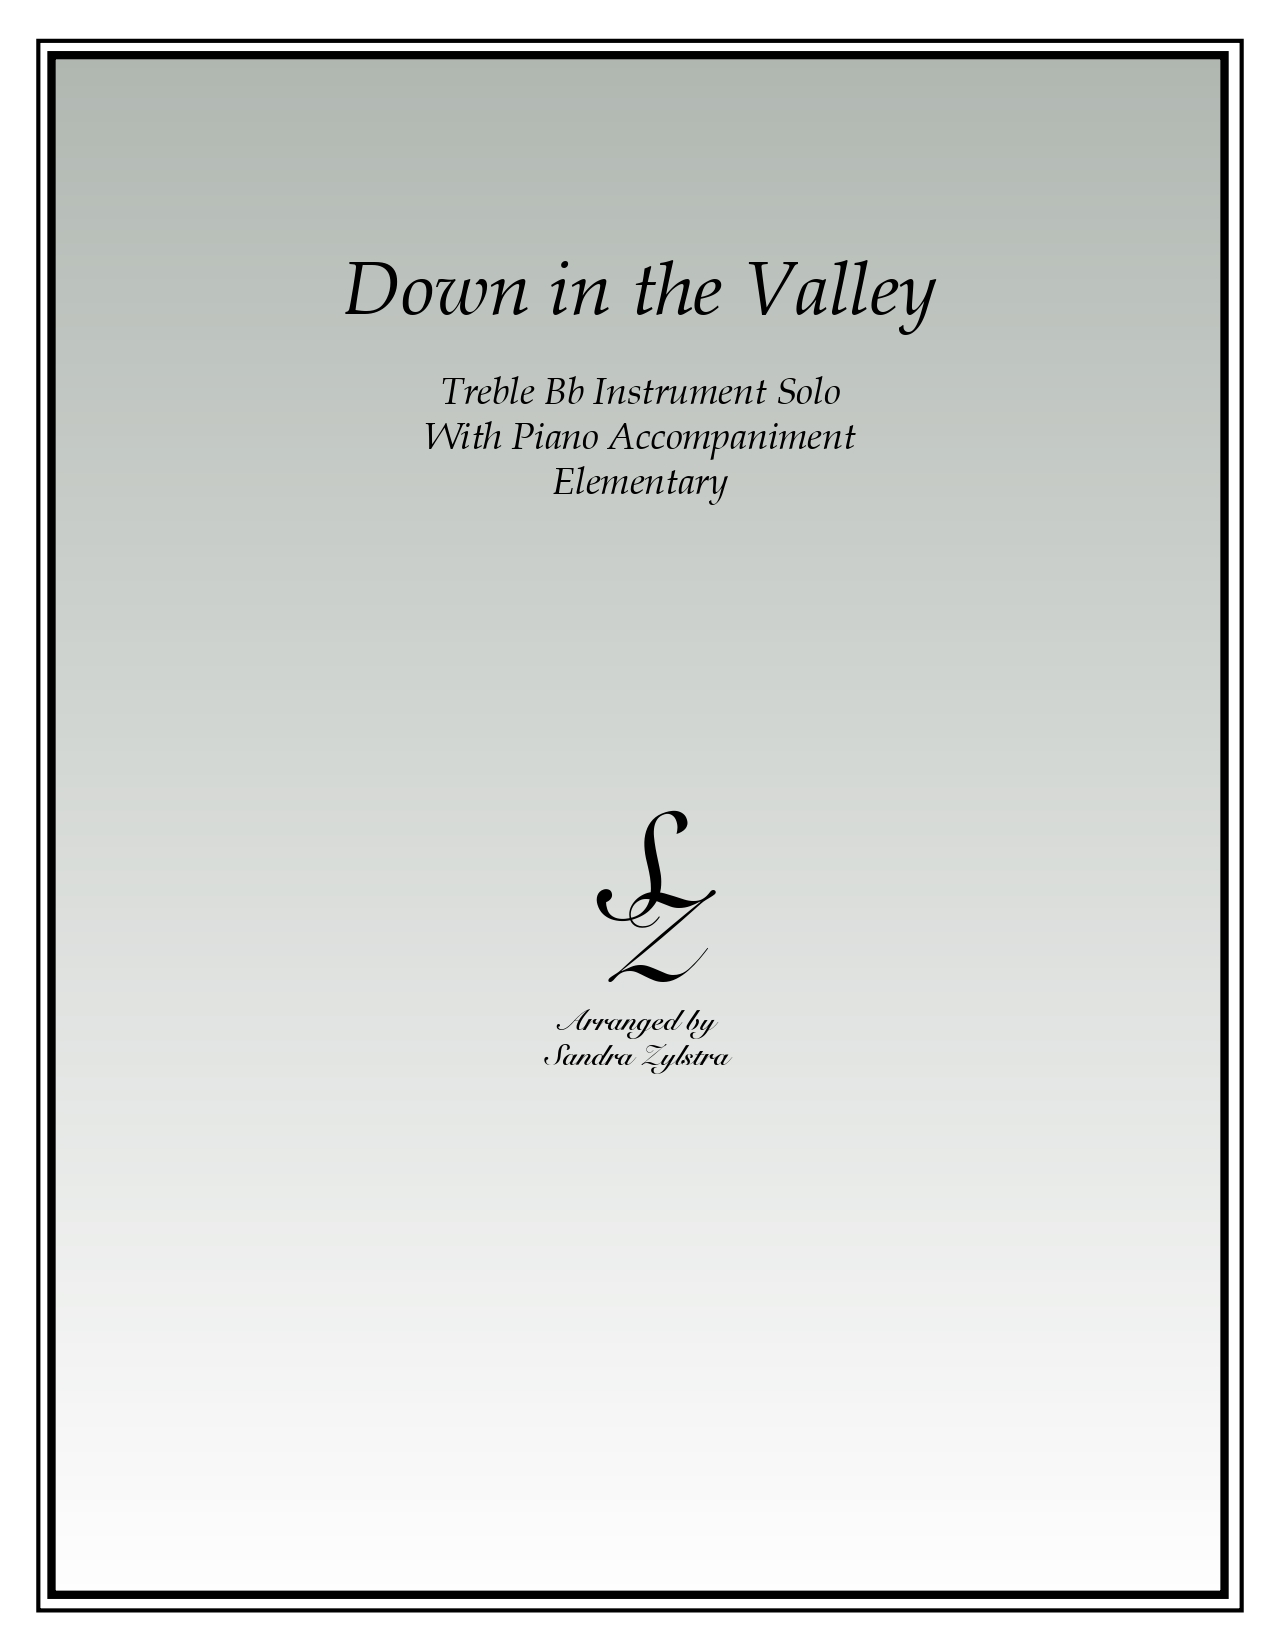 Down In The Valley Bb instrument solo part cover page 00011